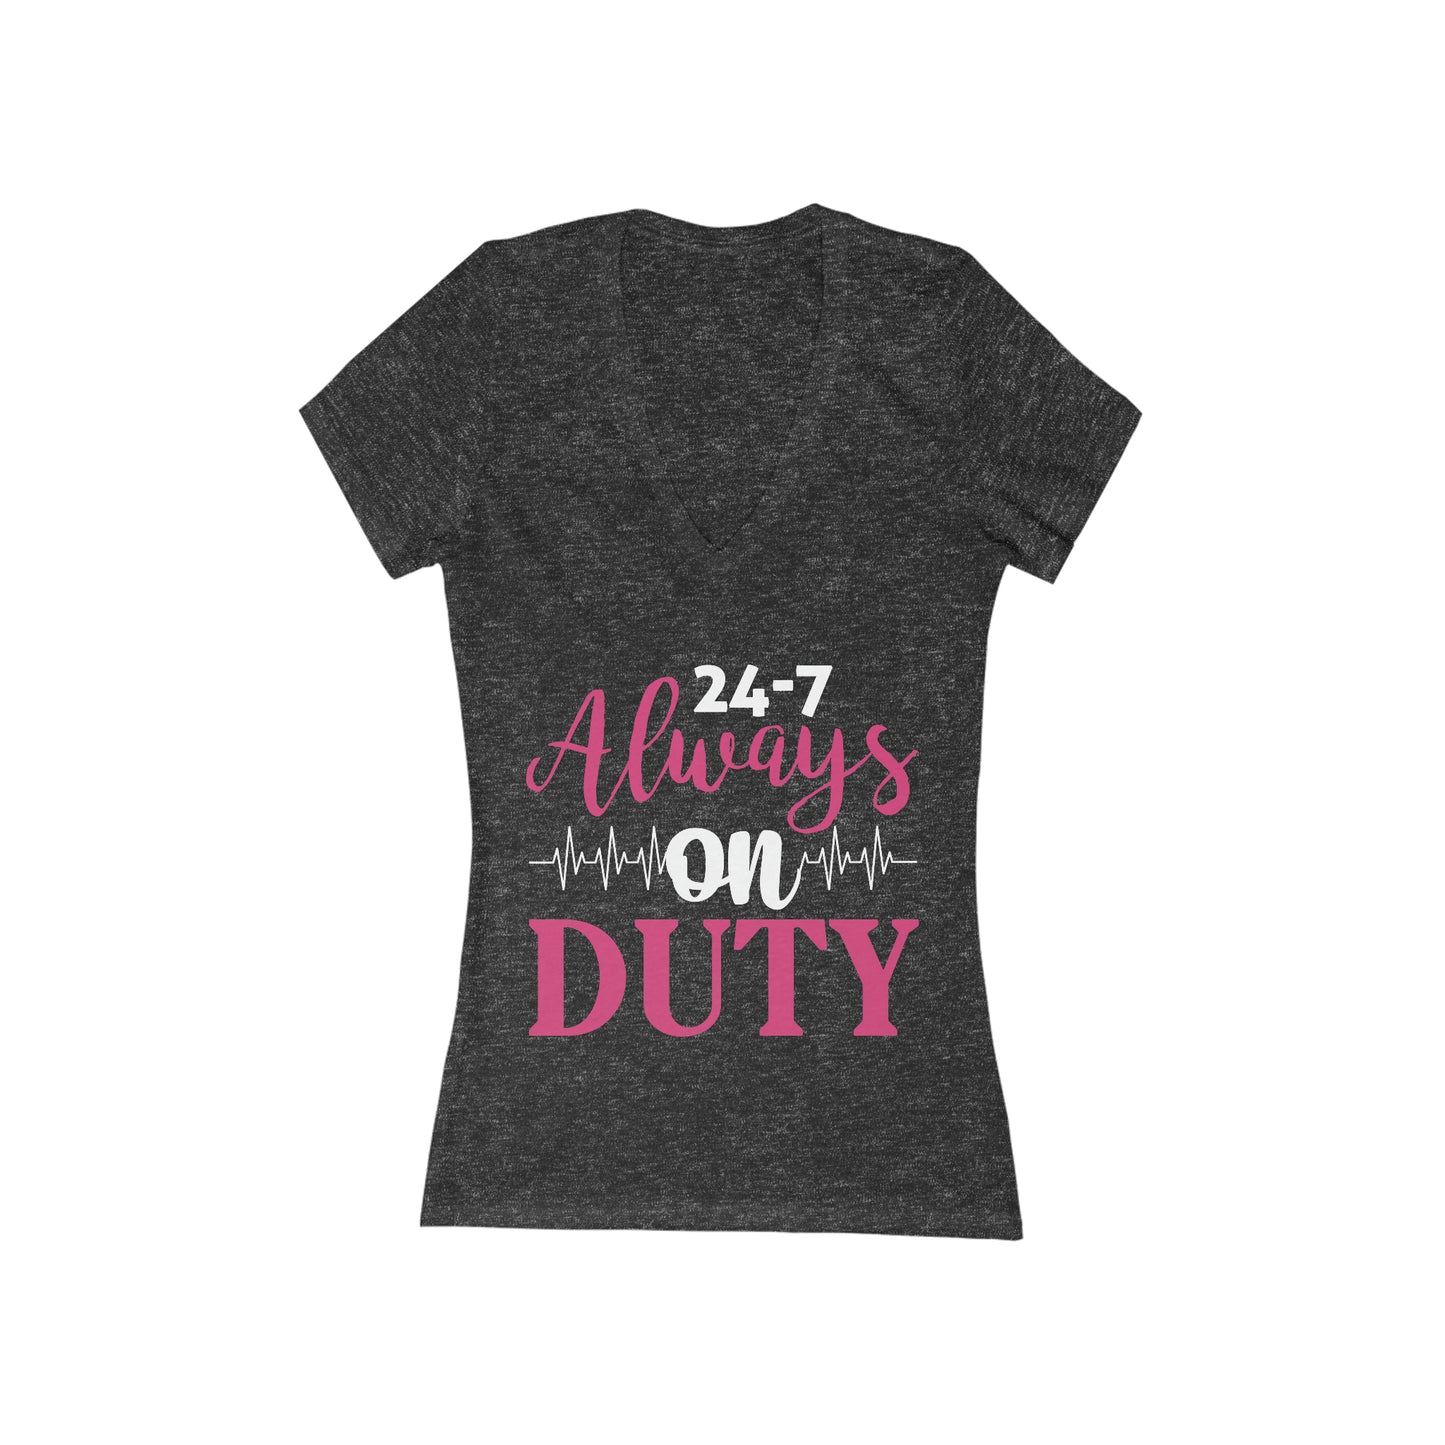 24-7 Always On Duty Women's Short Sleeve V-Neck Tee, Doctor shirts, Doctor gift ideas, gift for doctors, women shirt with doctor design